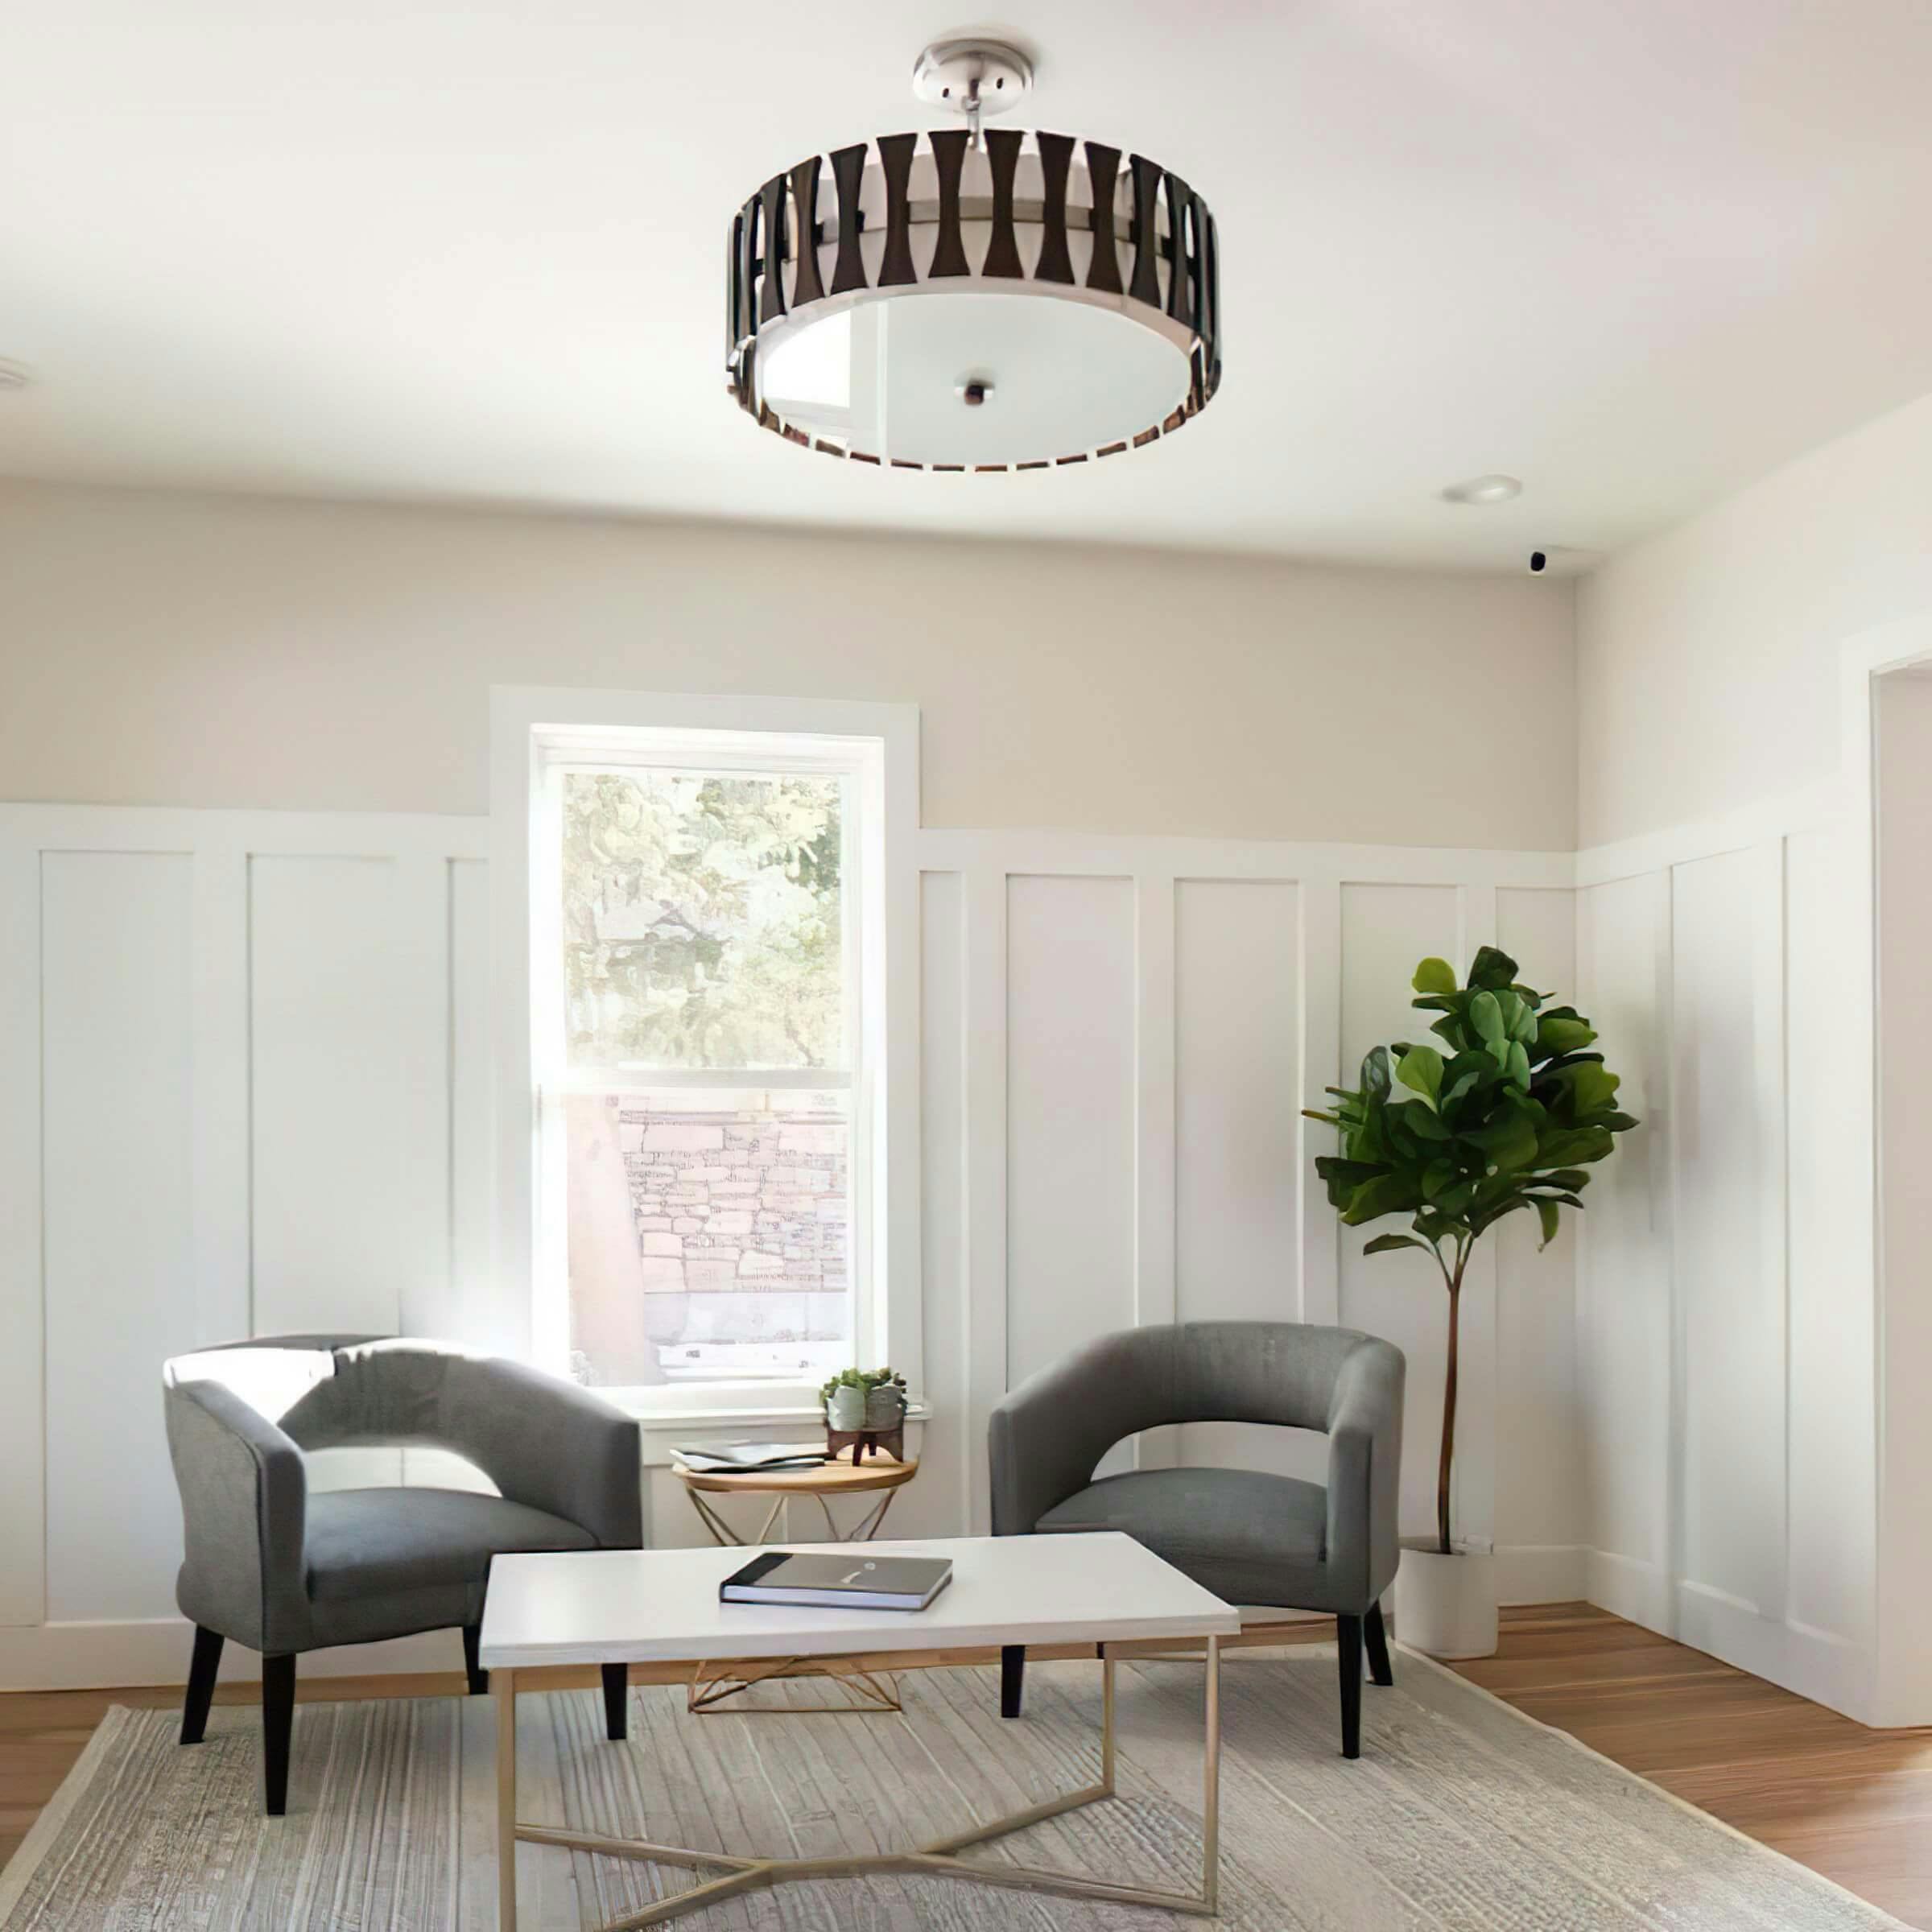 Sitting area with Kichler semi-flush hanging over 2 chairs